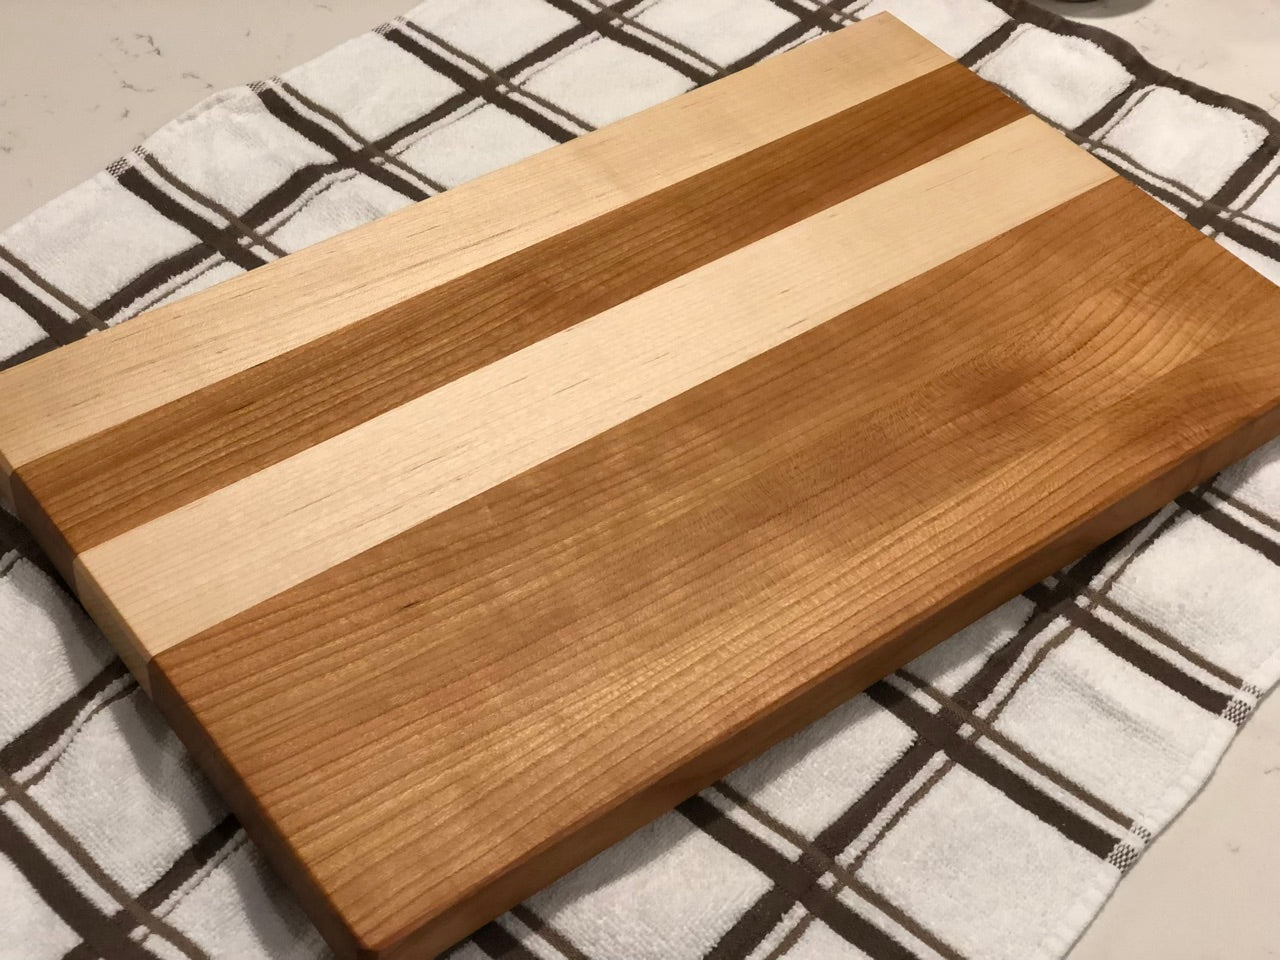 Cherry and Maple Cutting Board